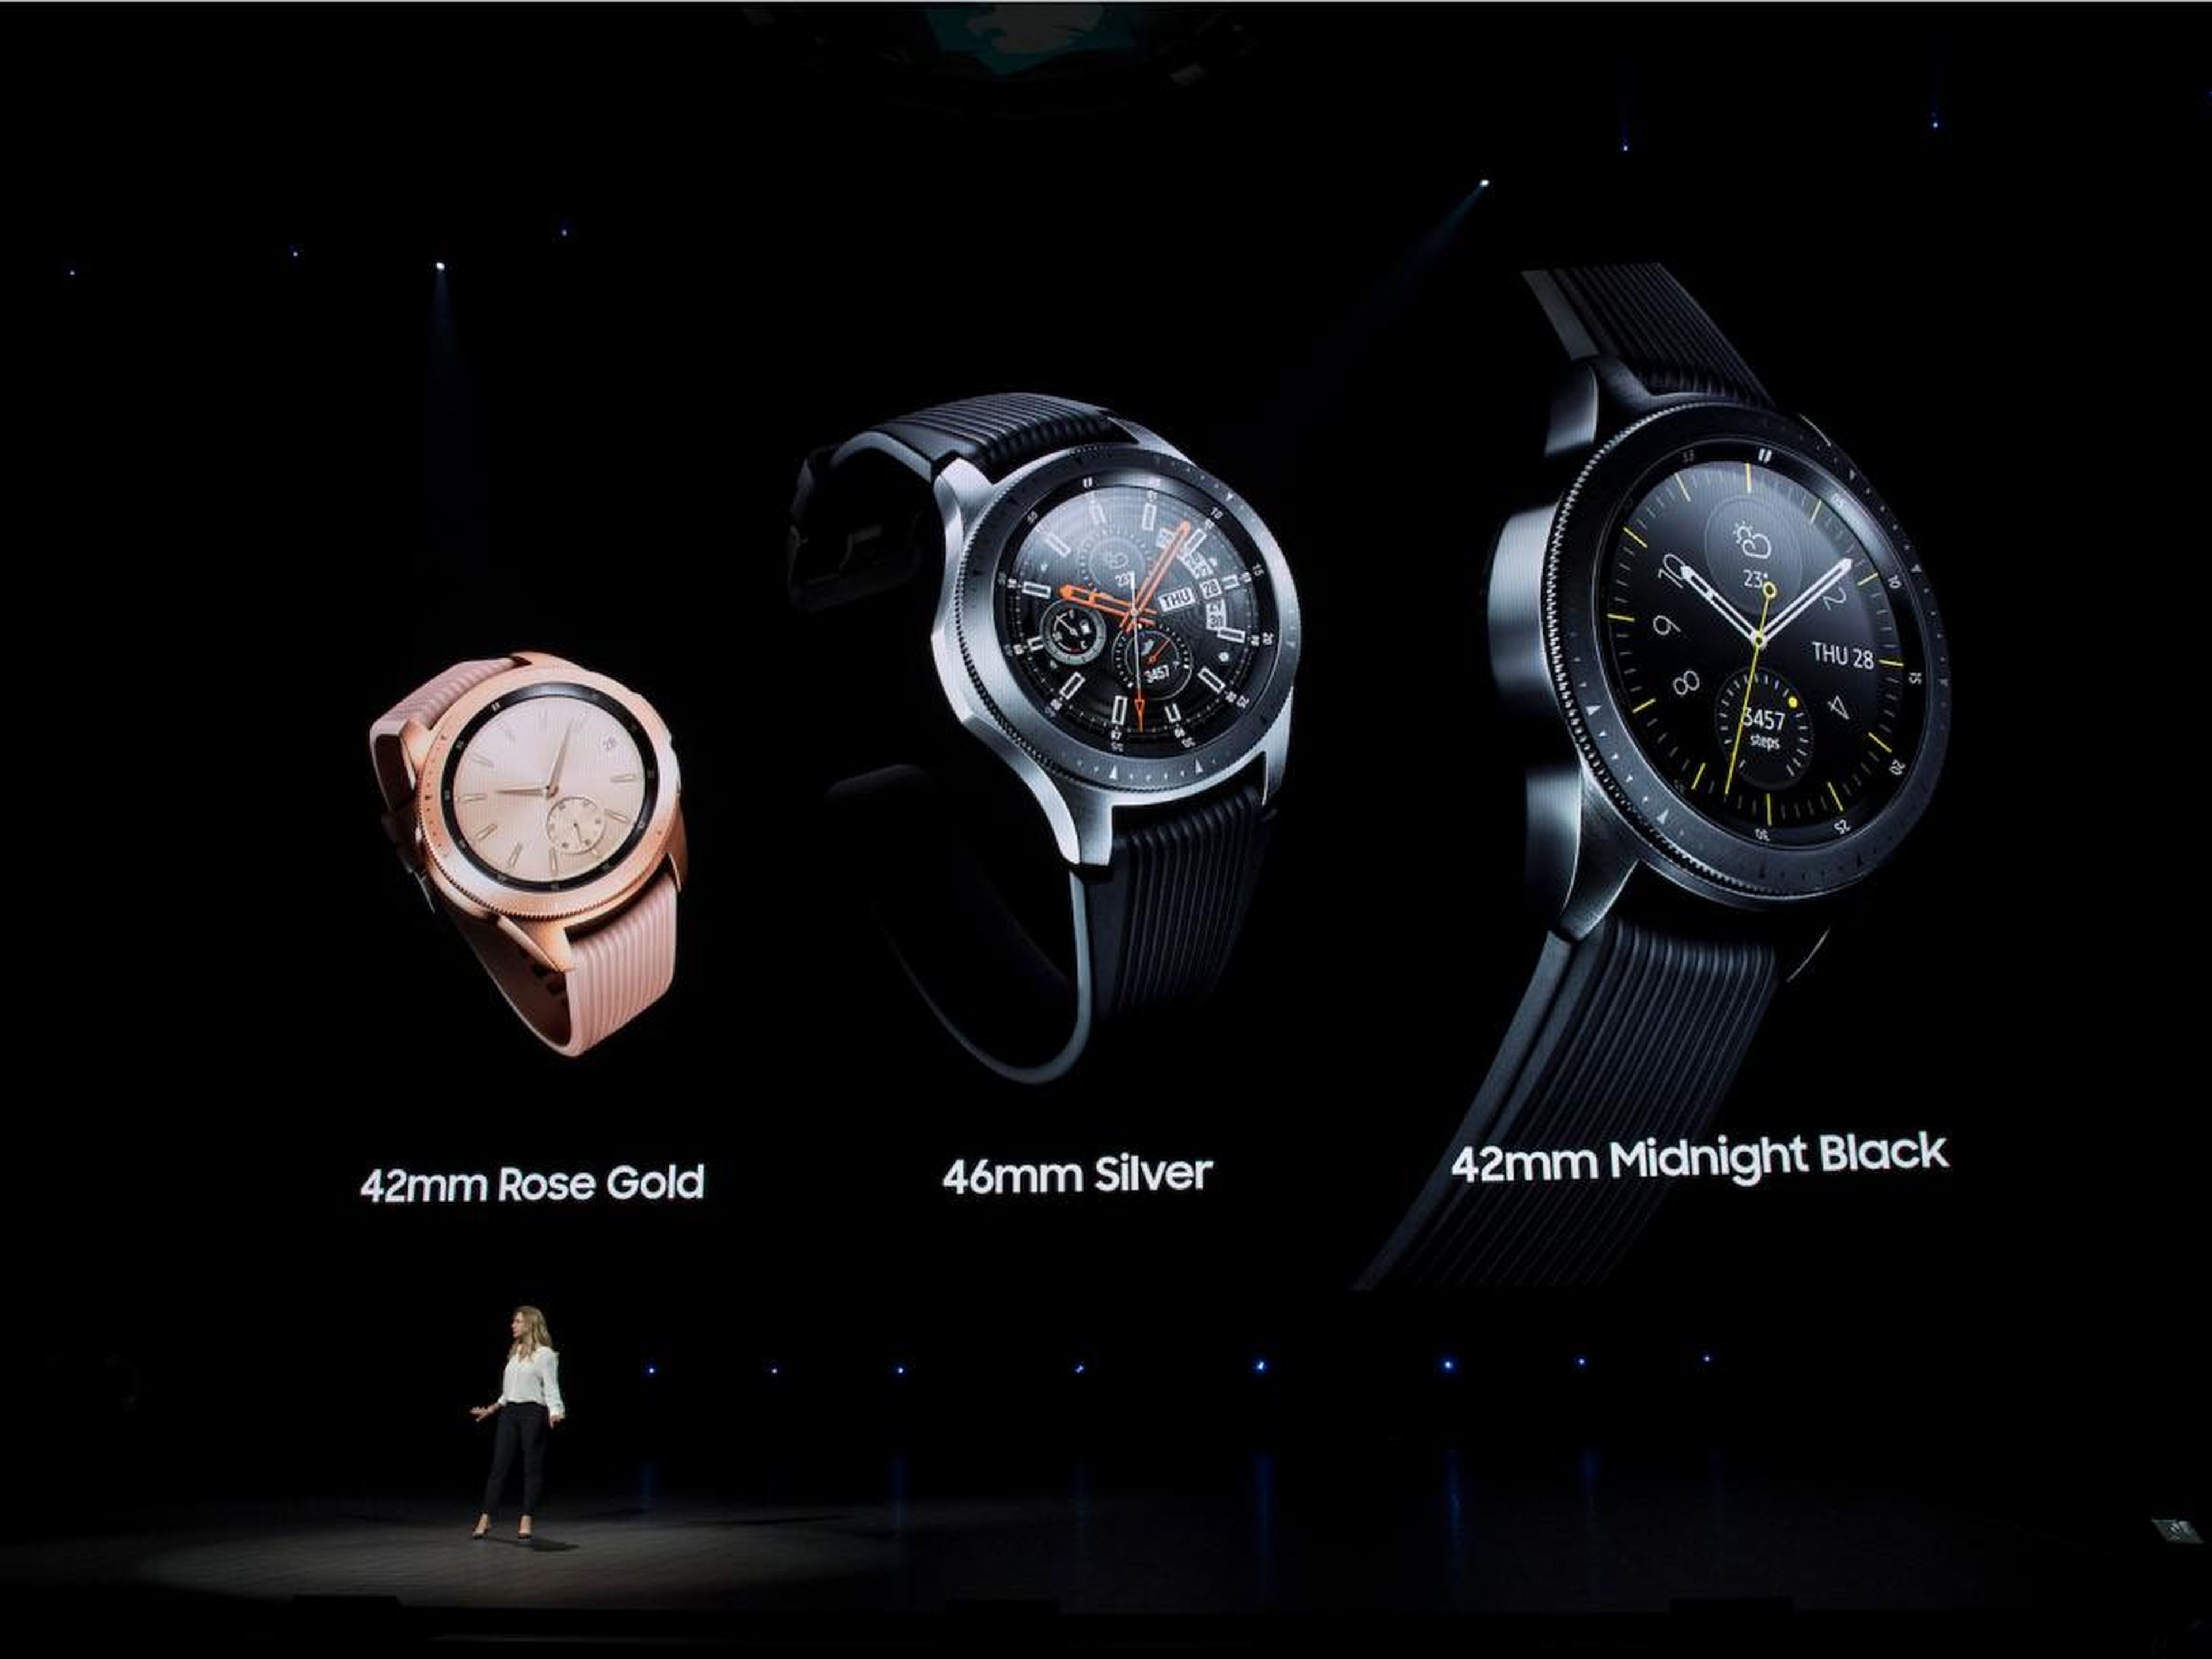 Elina Vives unveils the Galaxy Watch at Samsung Unpacked.